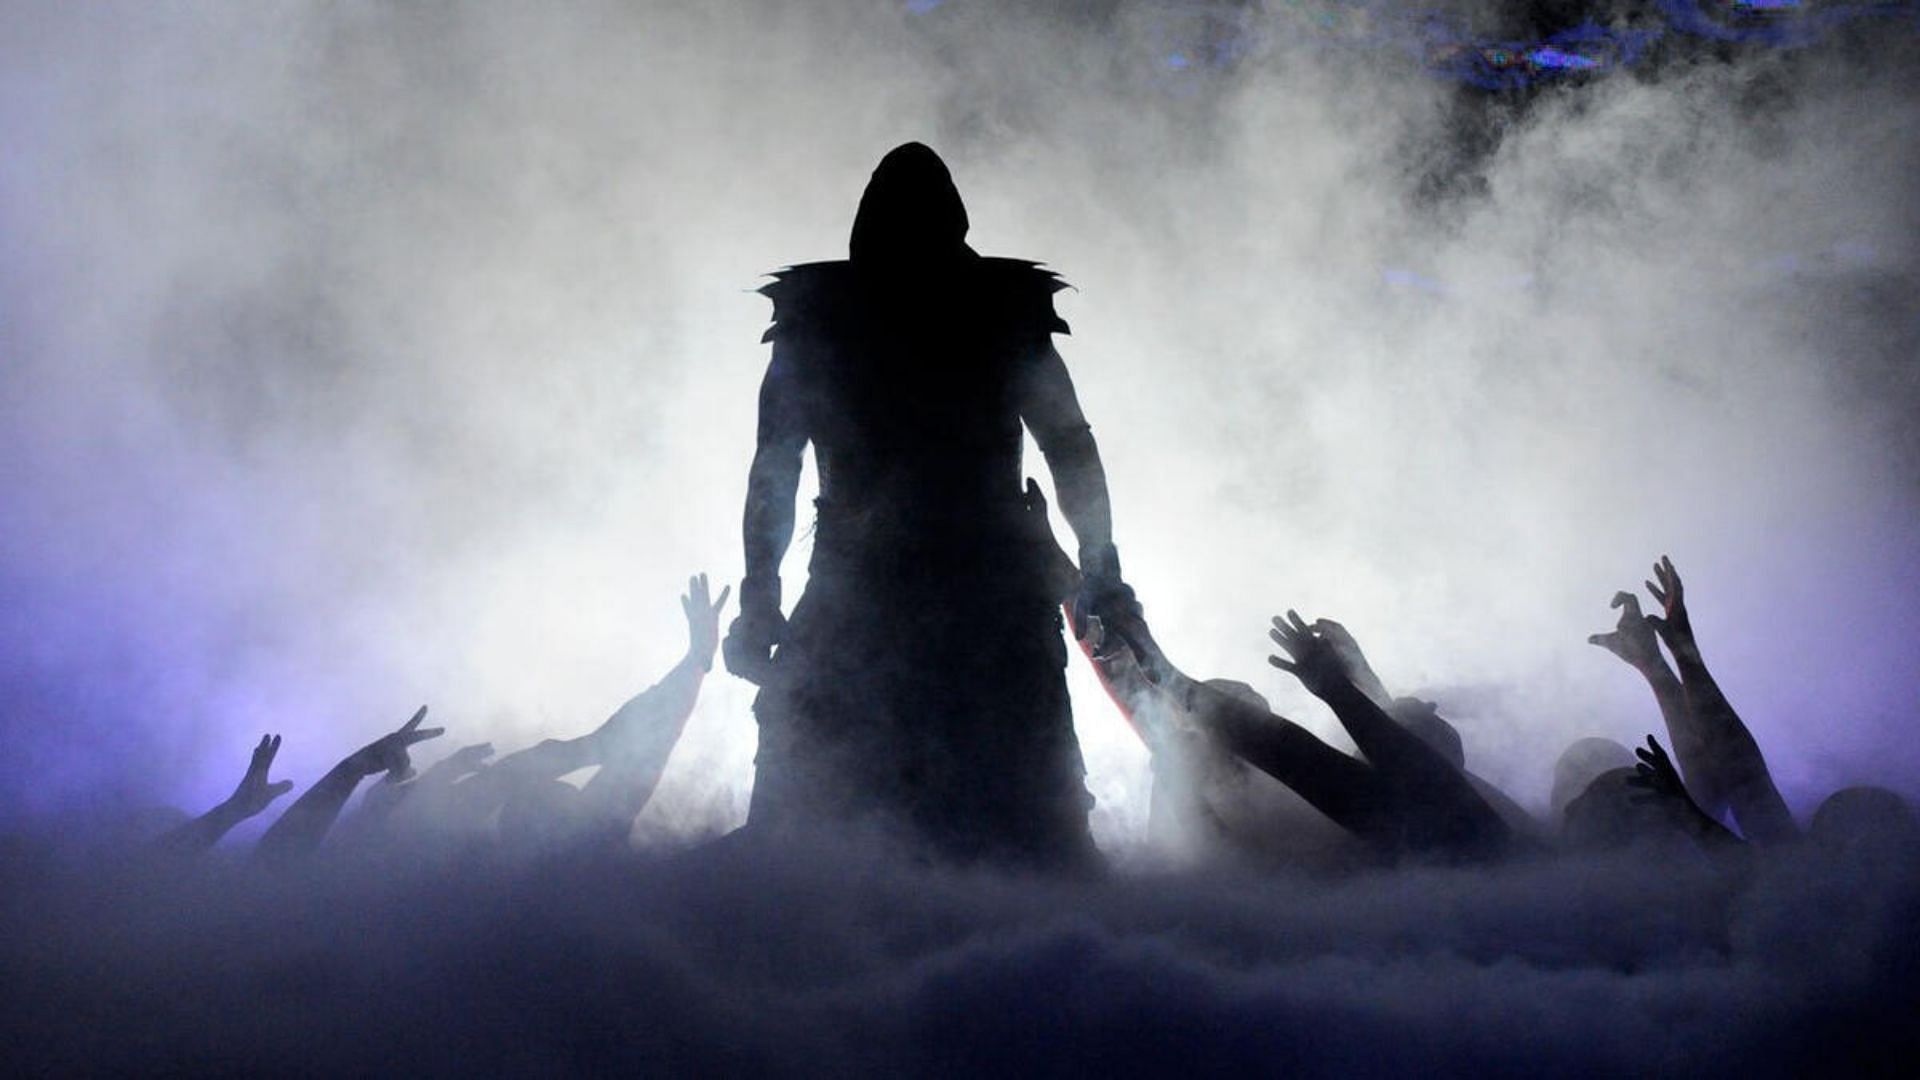 The Undertaker made a career out of amazing WrestleMania entrances.